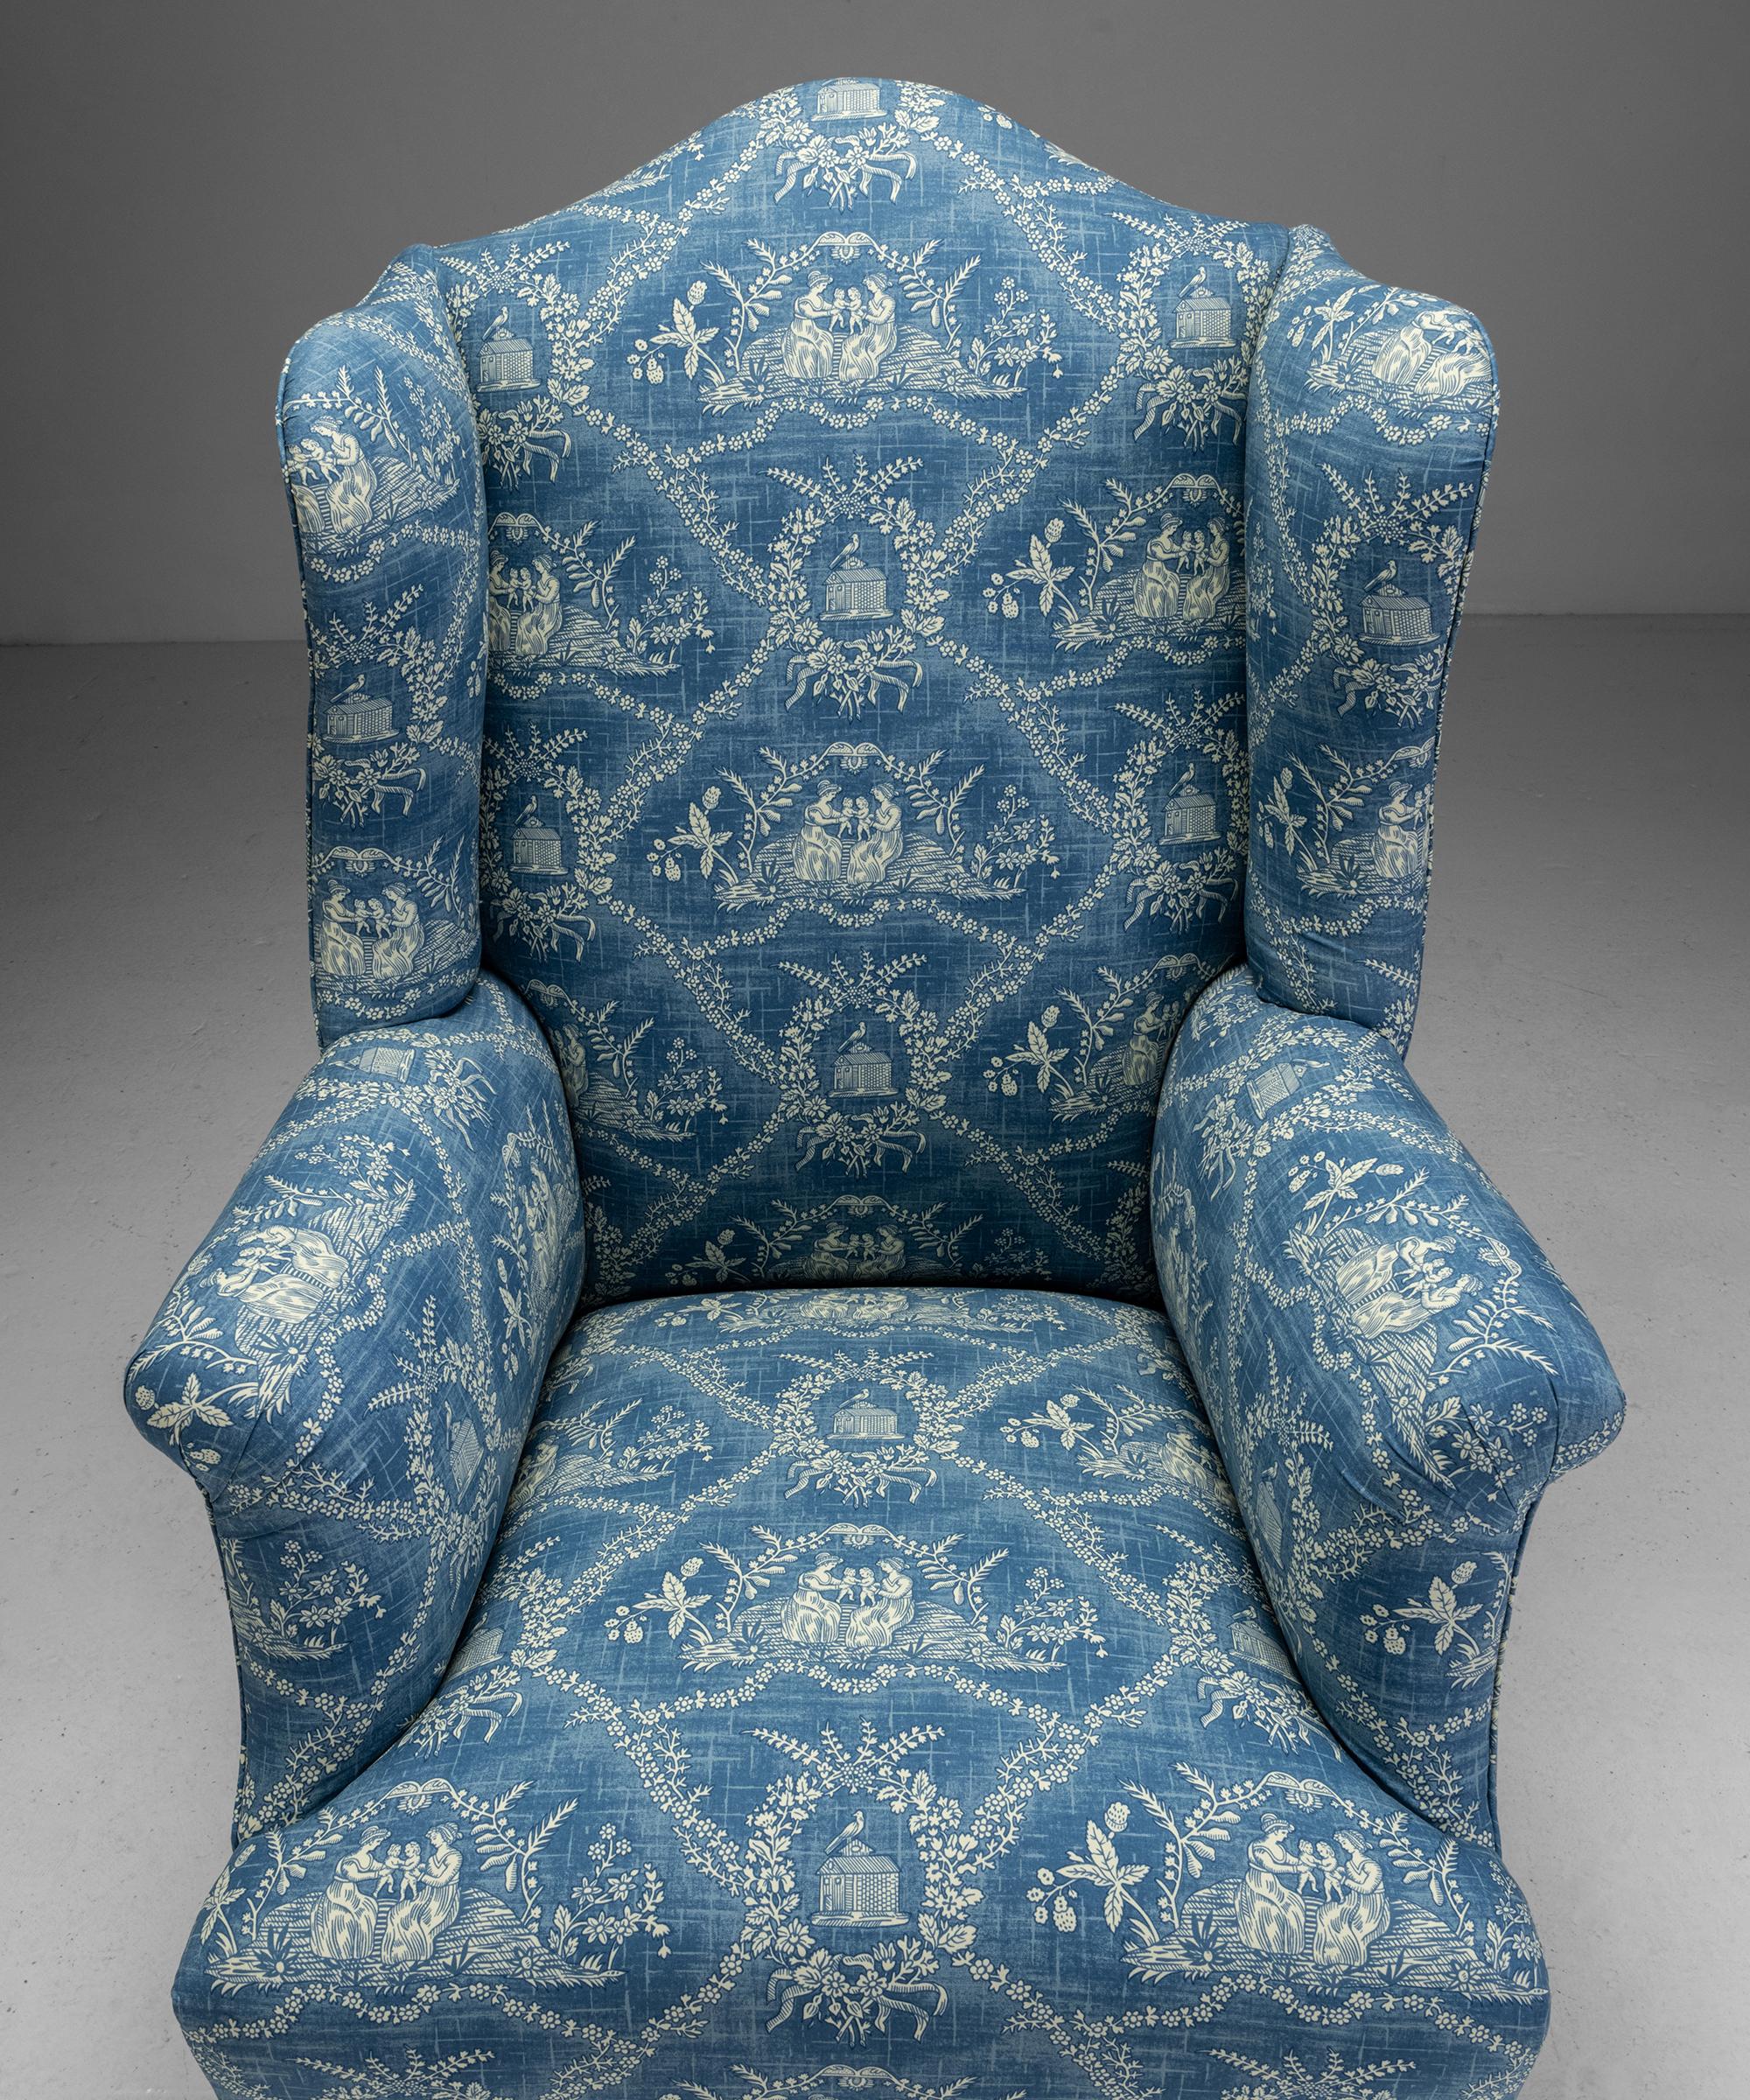 English Georgian Wingback Armchair in 100% Cotton Toile Fabric from Pierre Frey